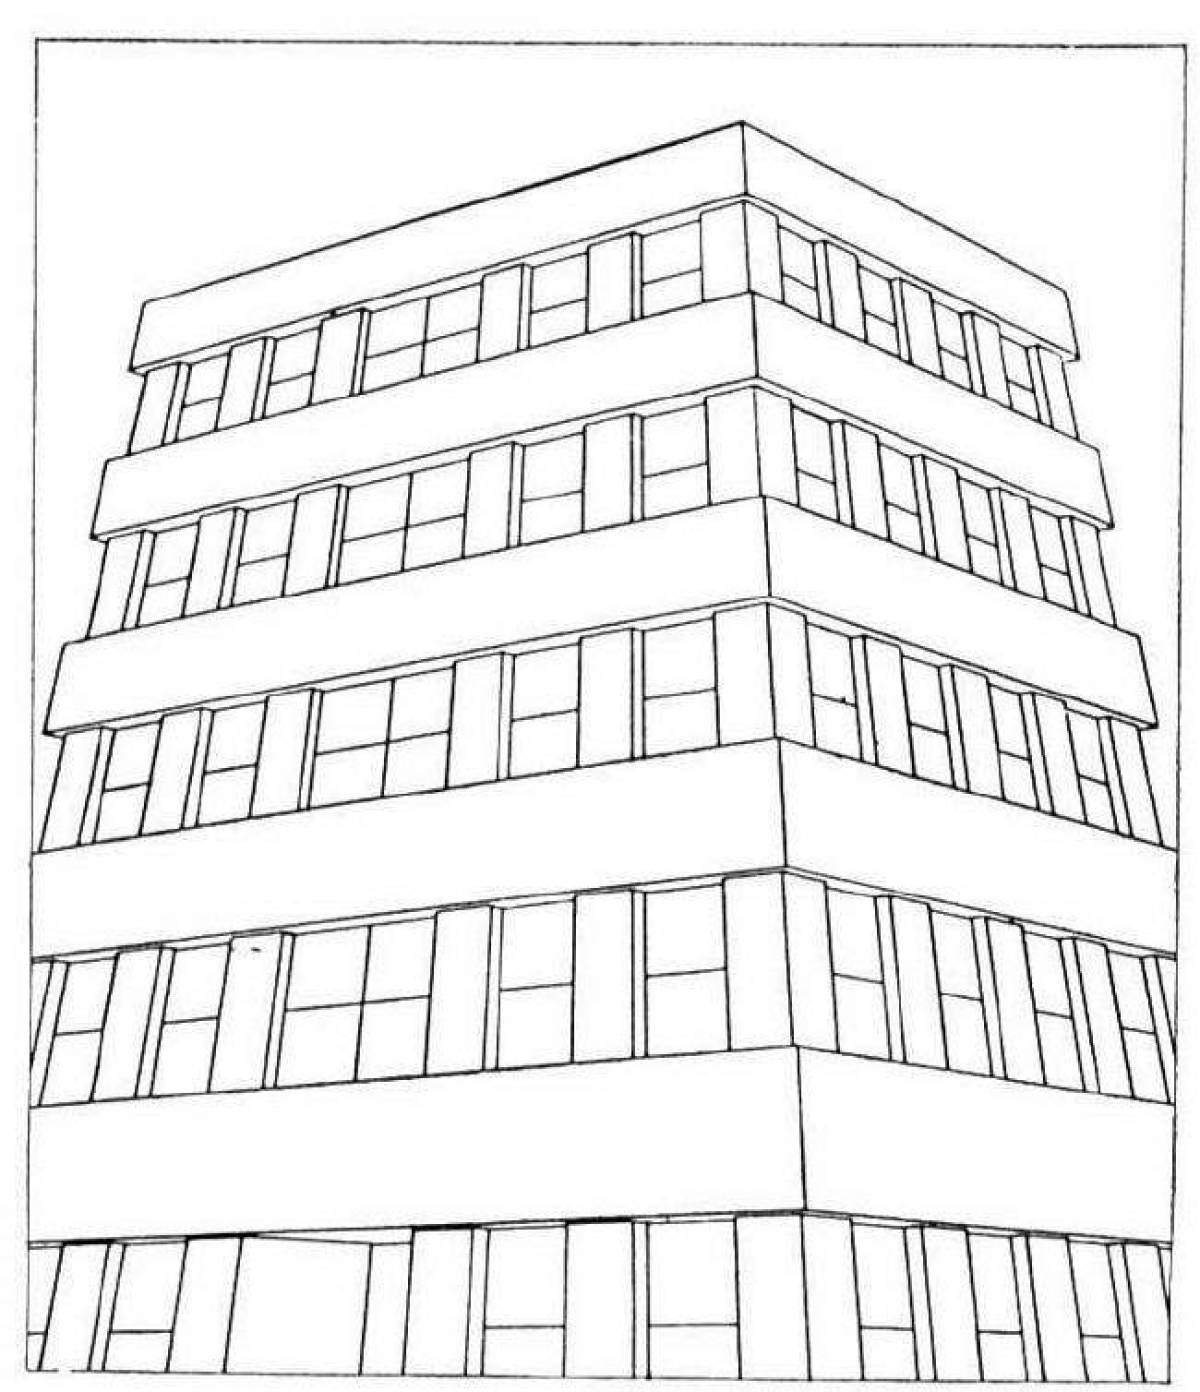 Coloring page of a magnificent high-rise building